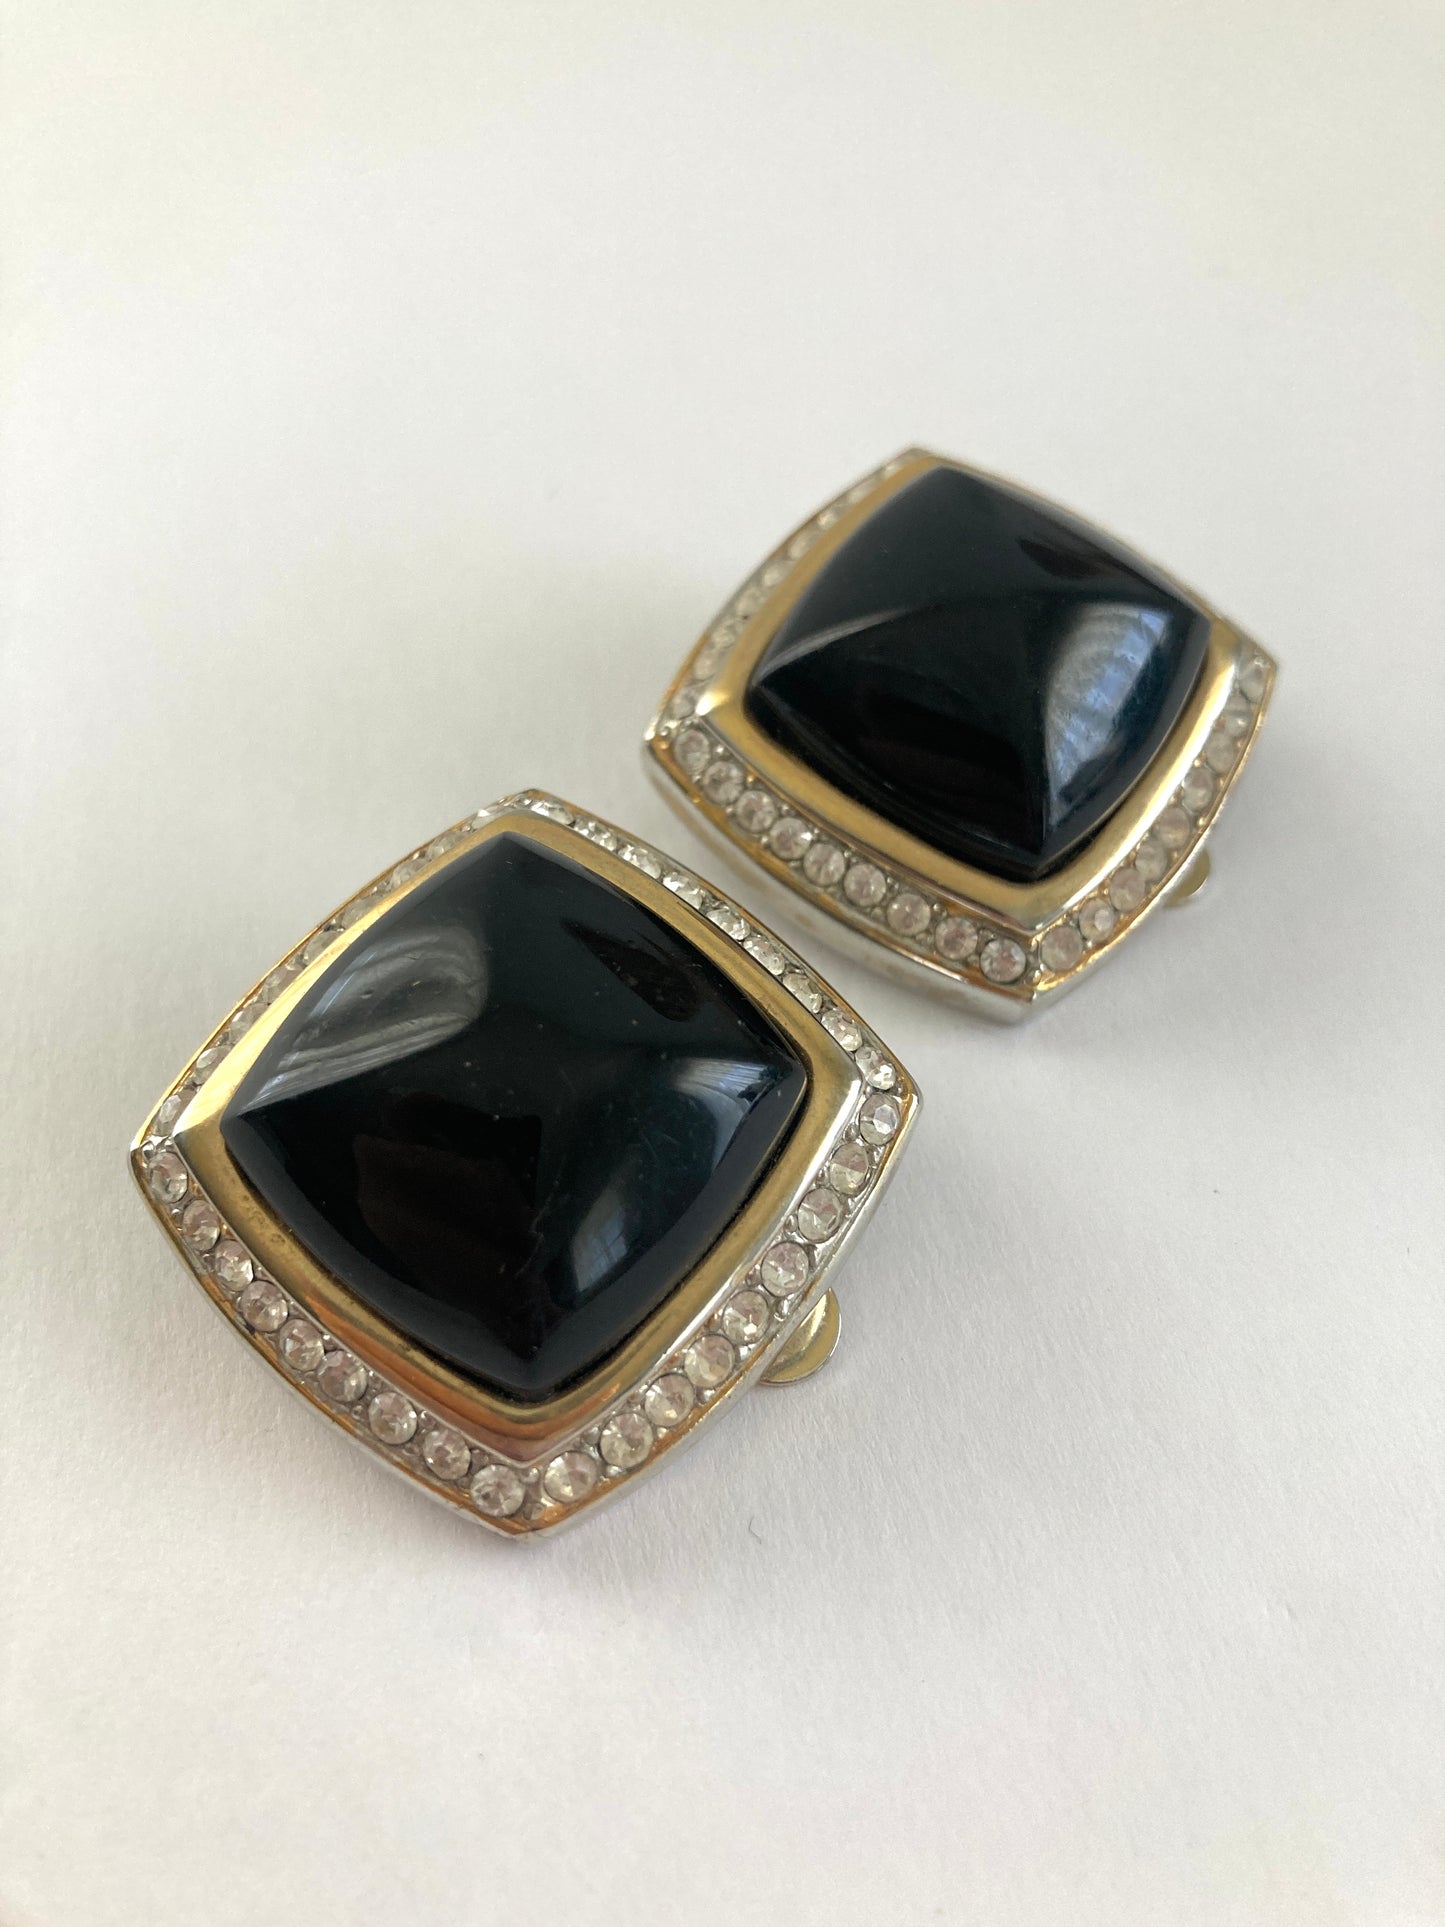 Big Bold Hollywood Regency Earrings in Black and Gold